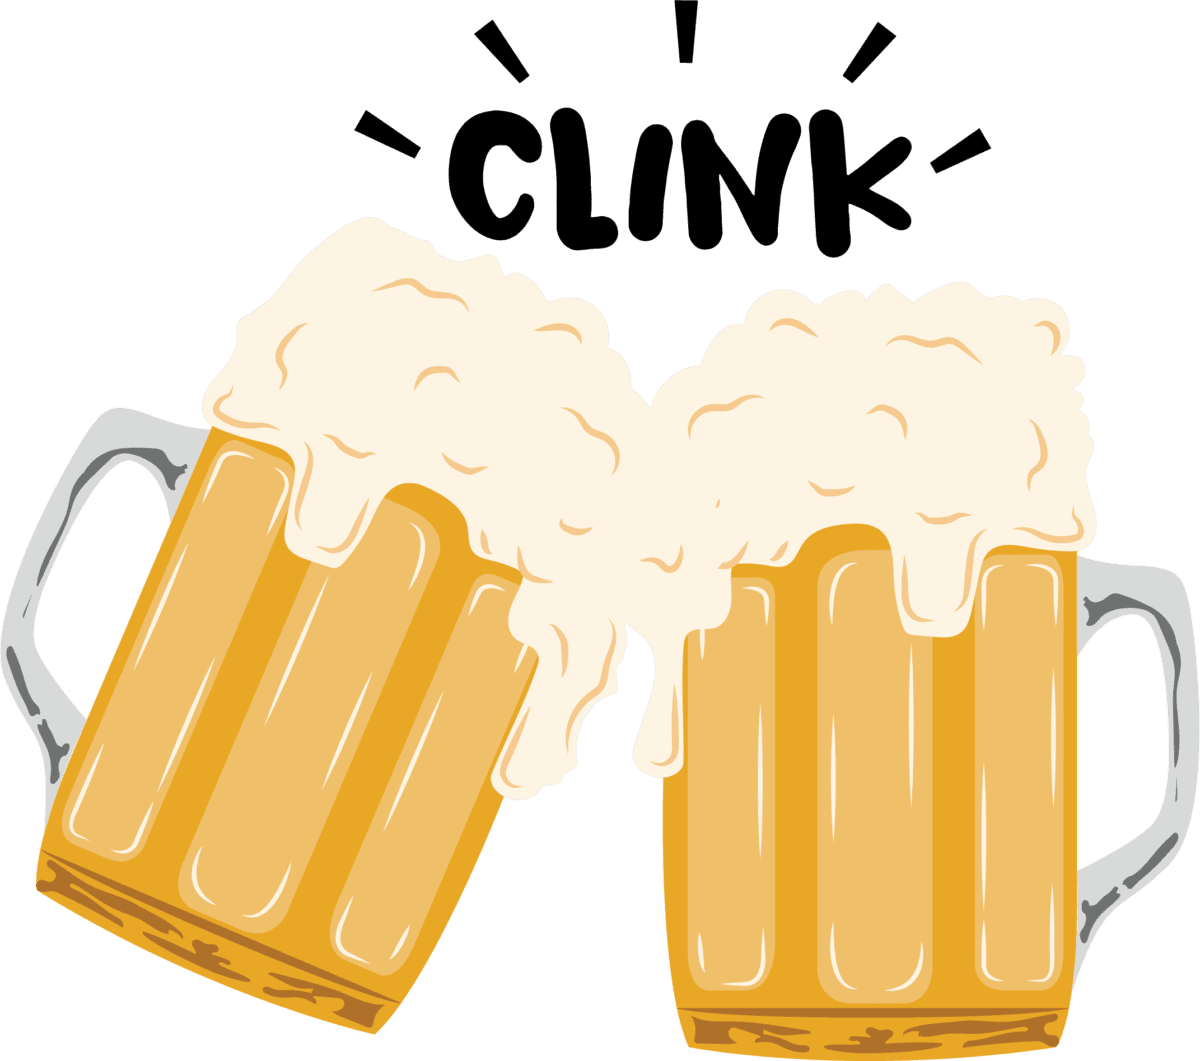 An illustration by Sian Williams of two mugs of beer clinking against each other